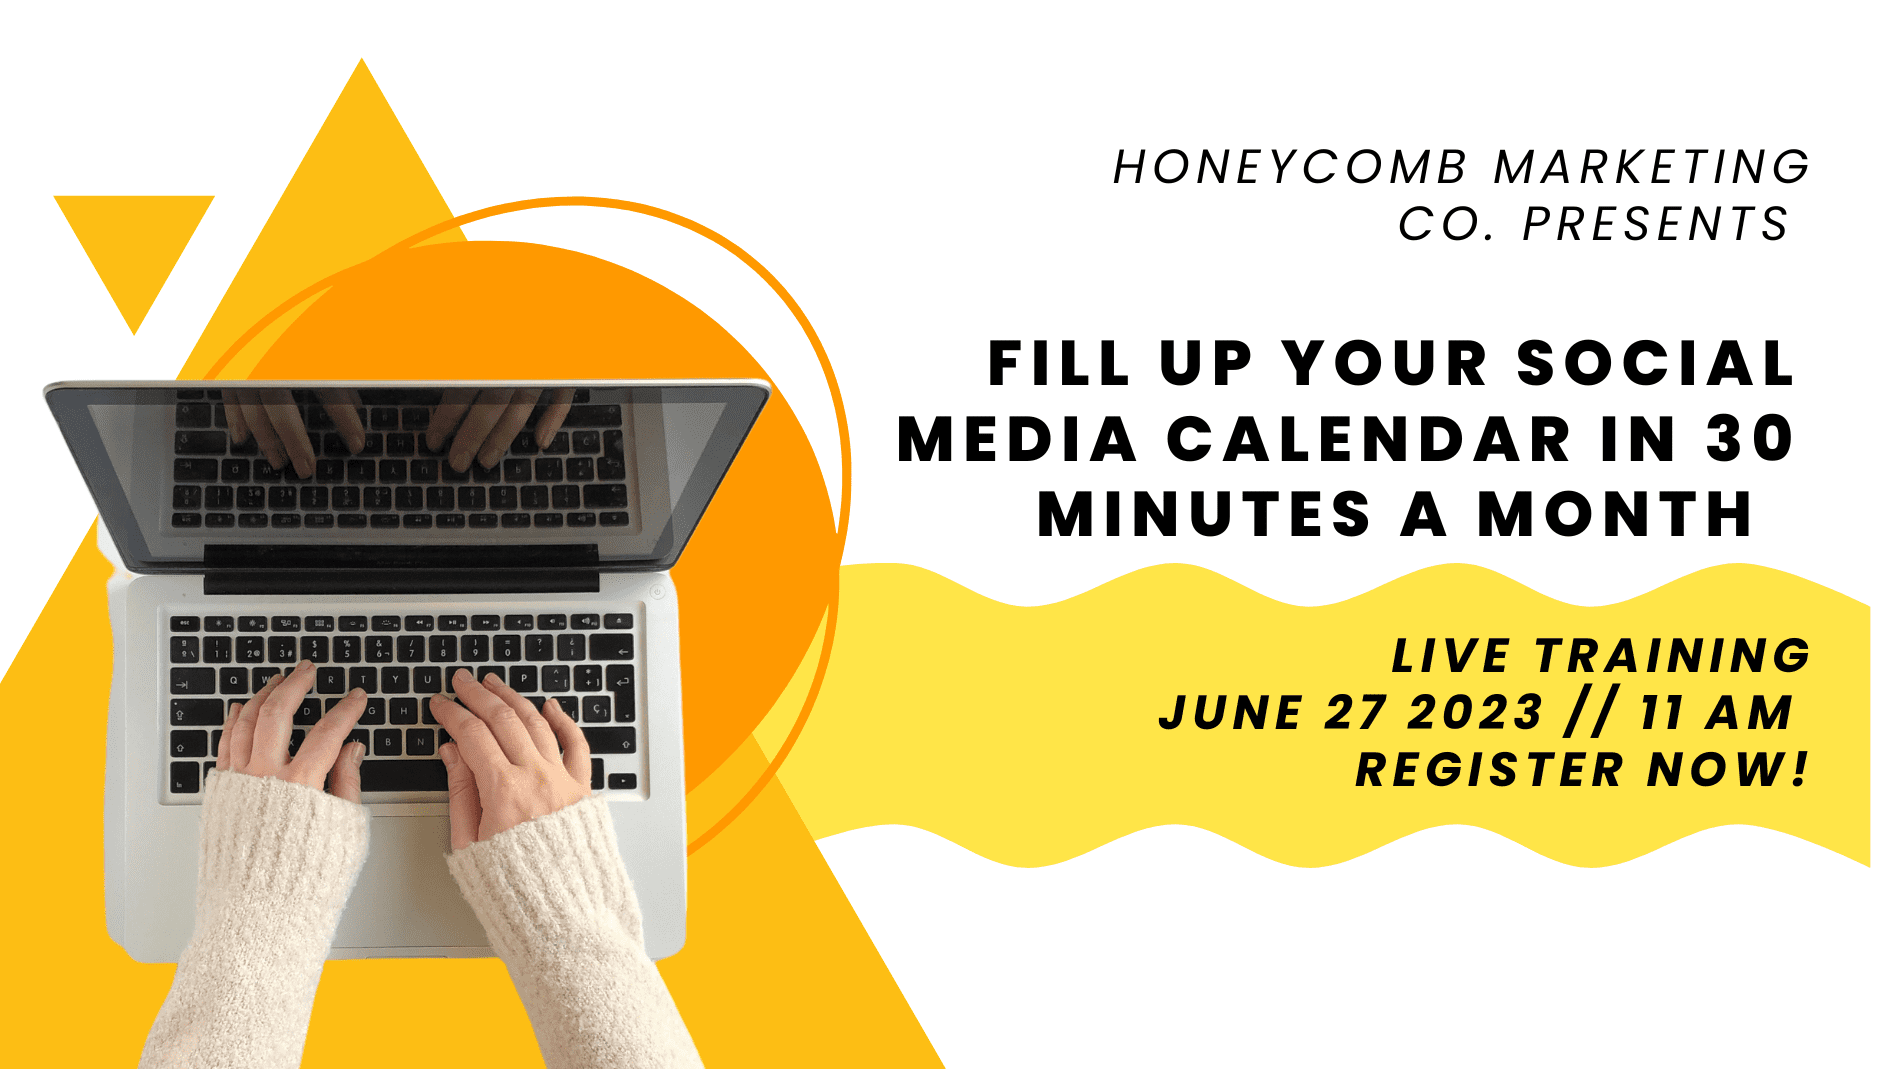 Fill Your Social Media Calendar in 30 Minutes a Month!